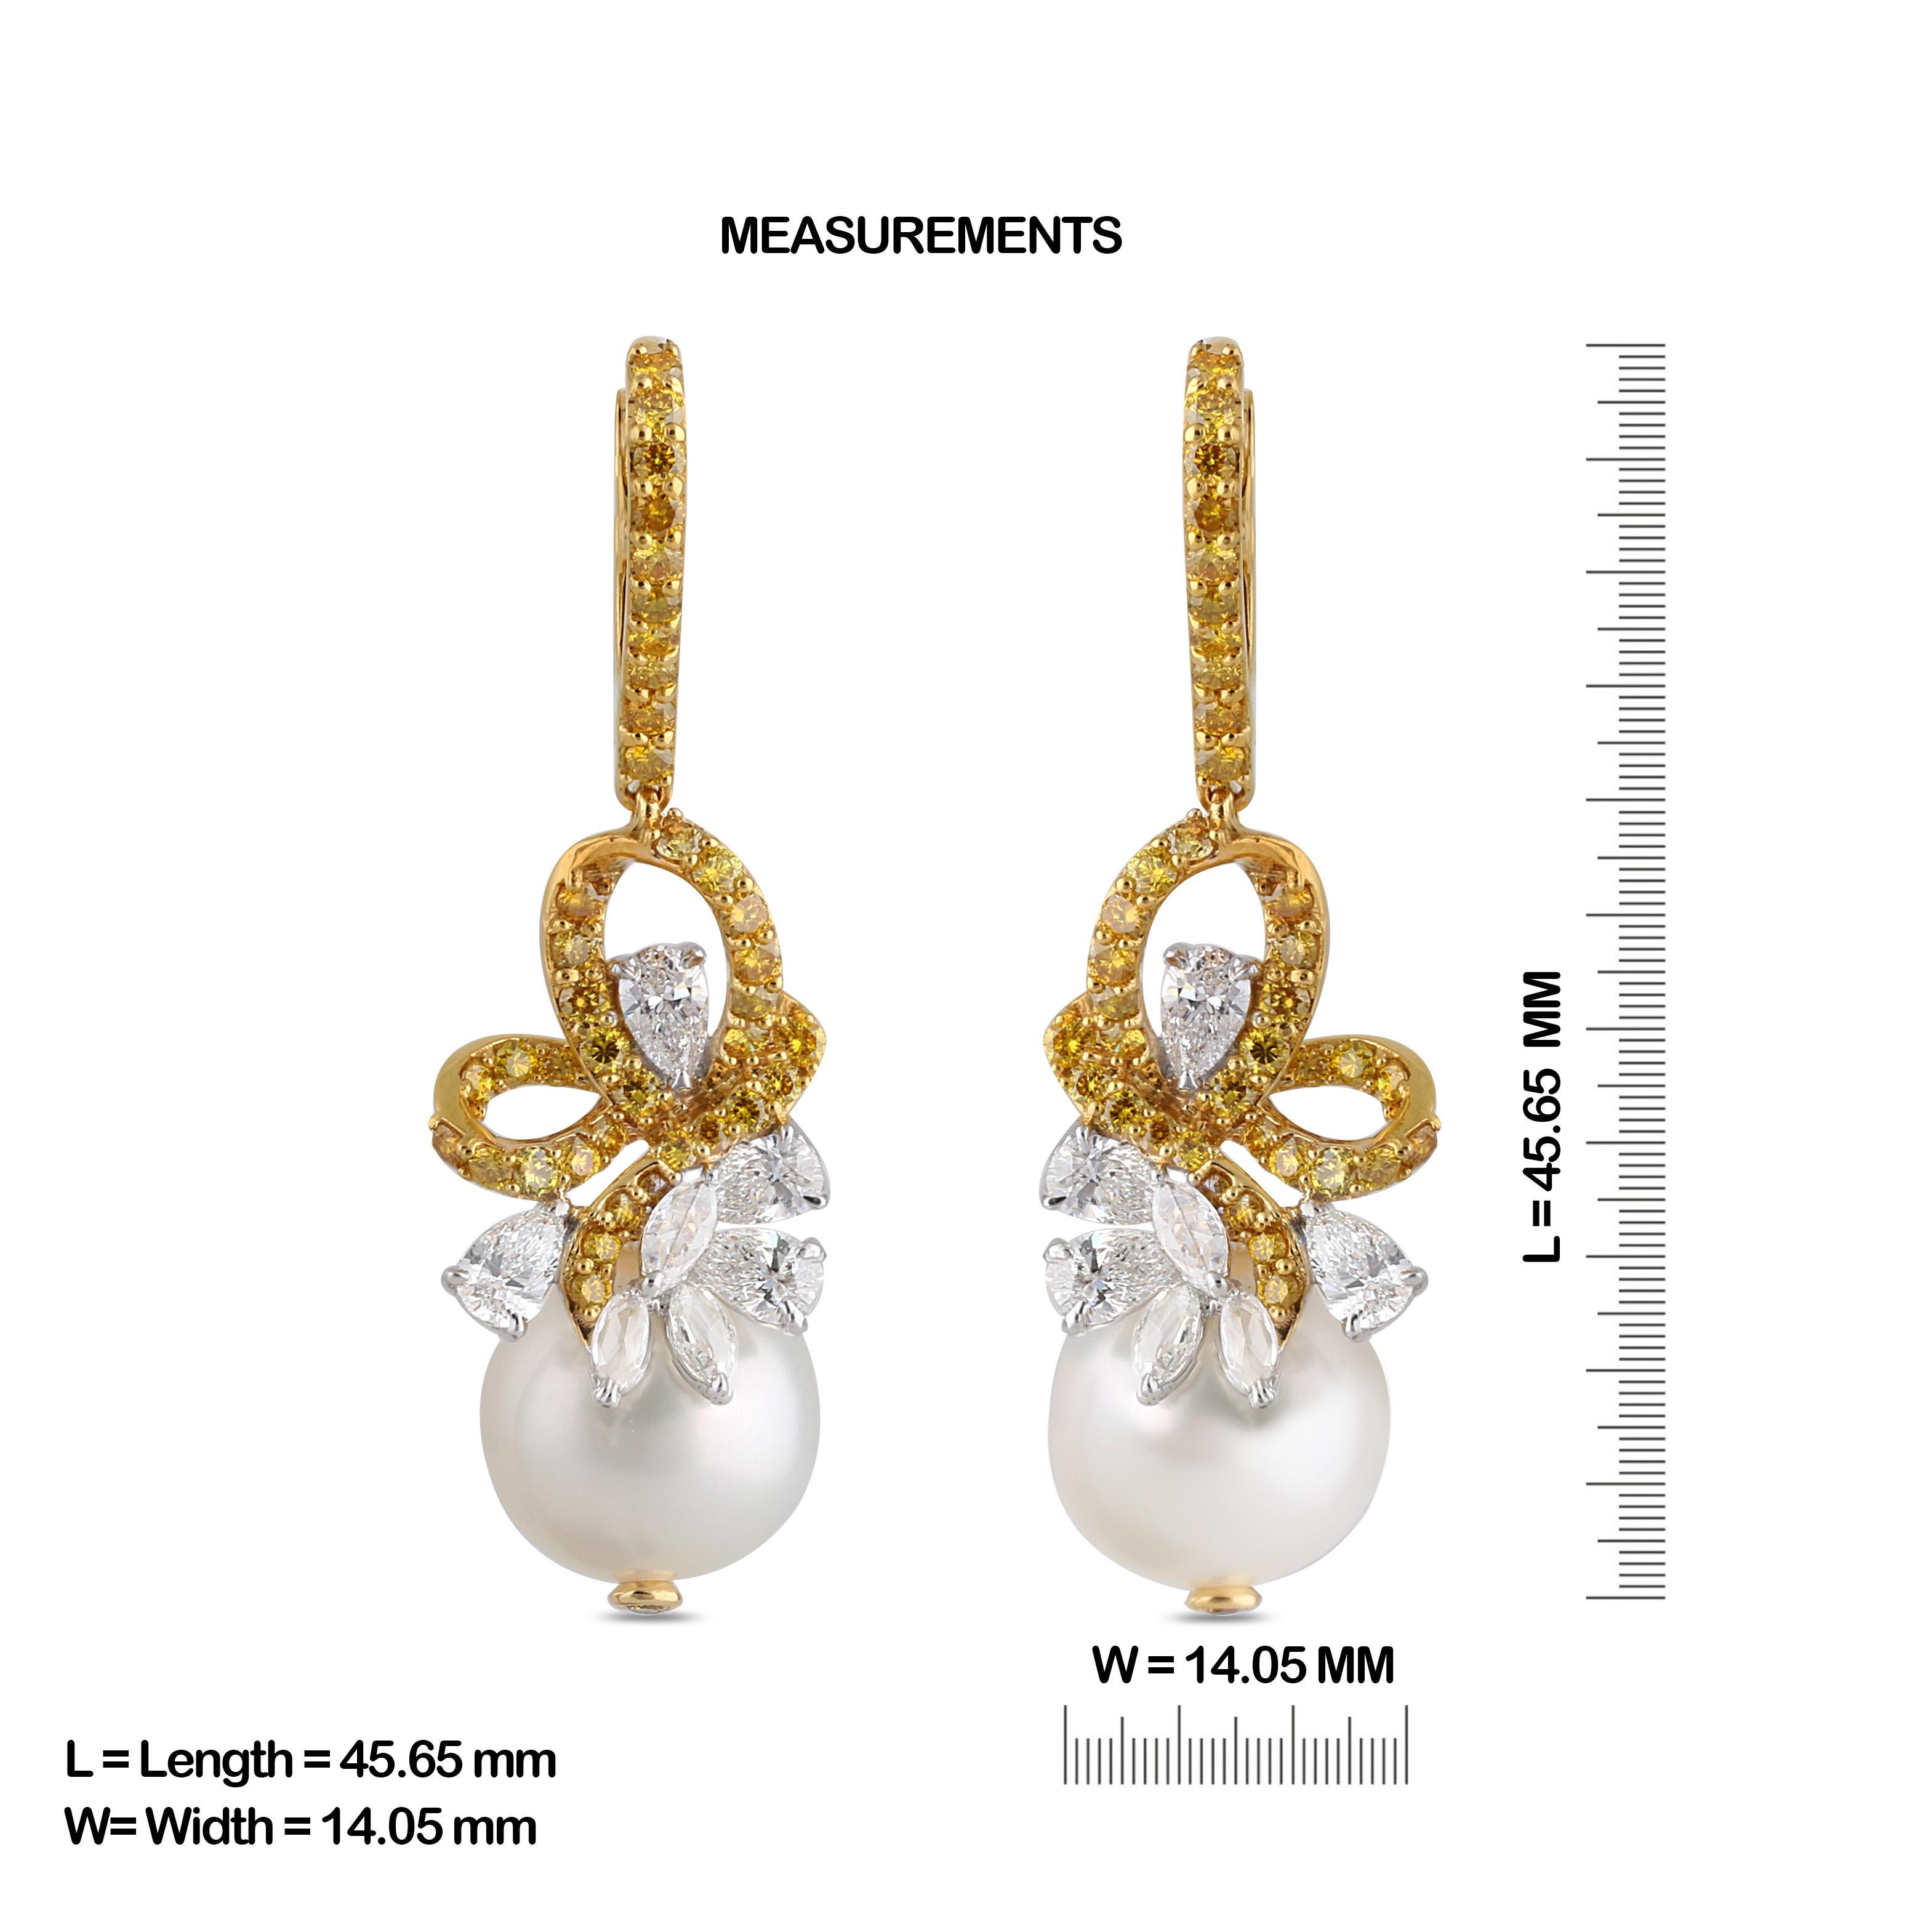 Gross Weight: 13.10 Grams
Diamond Weight: 3.29 cts
South Sea Pearl Weight: 25.83 cts
IGI Certification can be done on request.

Video of the product can be shared on request

Creatively crafted fancy ribbon-fold bow pearl dangling earrings in 18